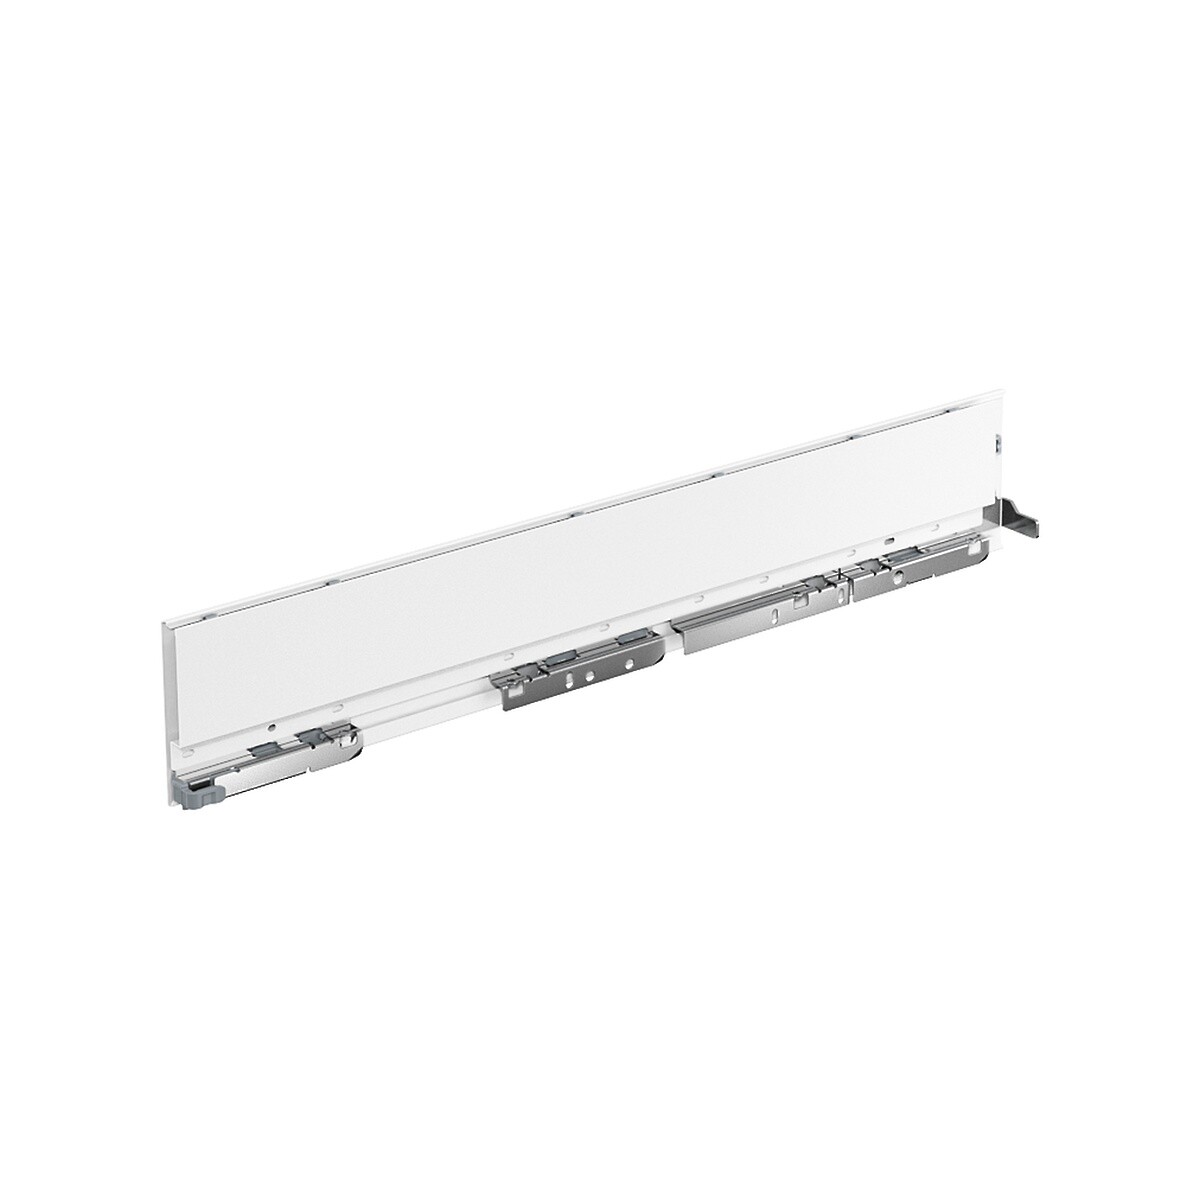 AvanTech YOU Drawer side profile, height 101 mm x NL 300 mm, White, Right